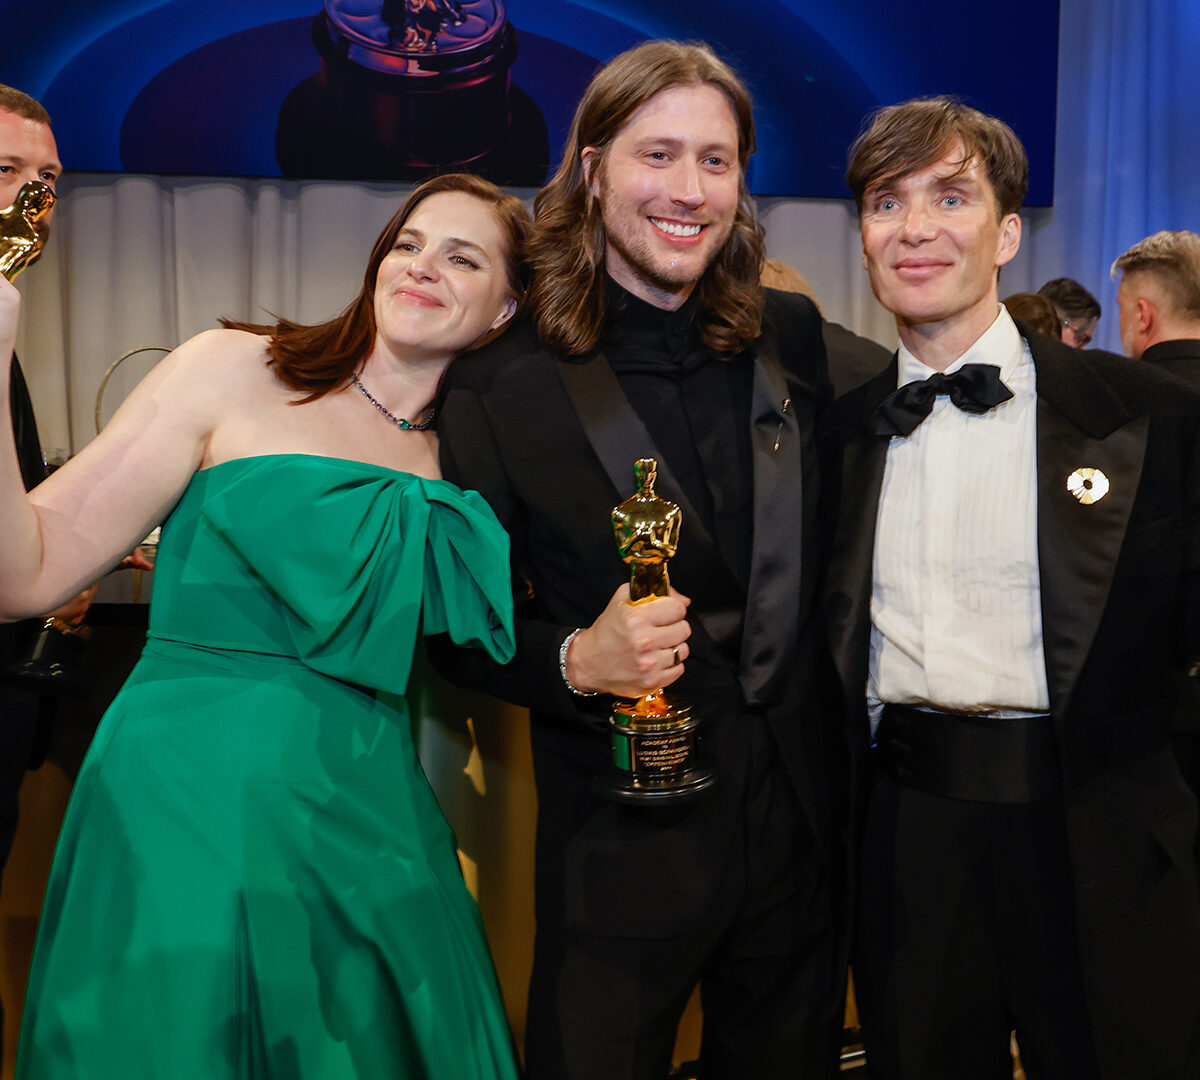 Oscar-winning composer Ludwig Göransson with Jennifer Lame and Cillian Murphy at the 96th Annual Academy Awards Governor's Ball, all holding Academy Award statuettes.